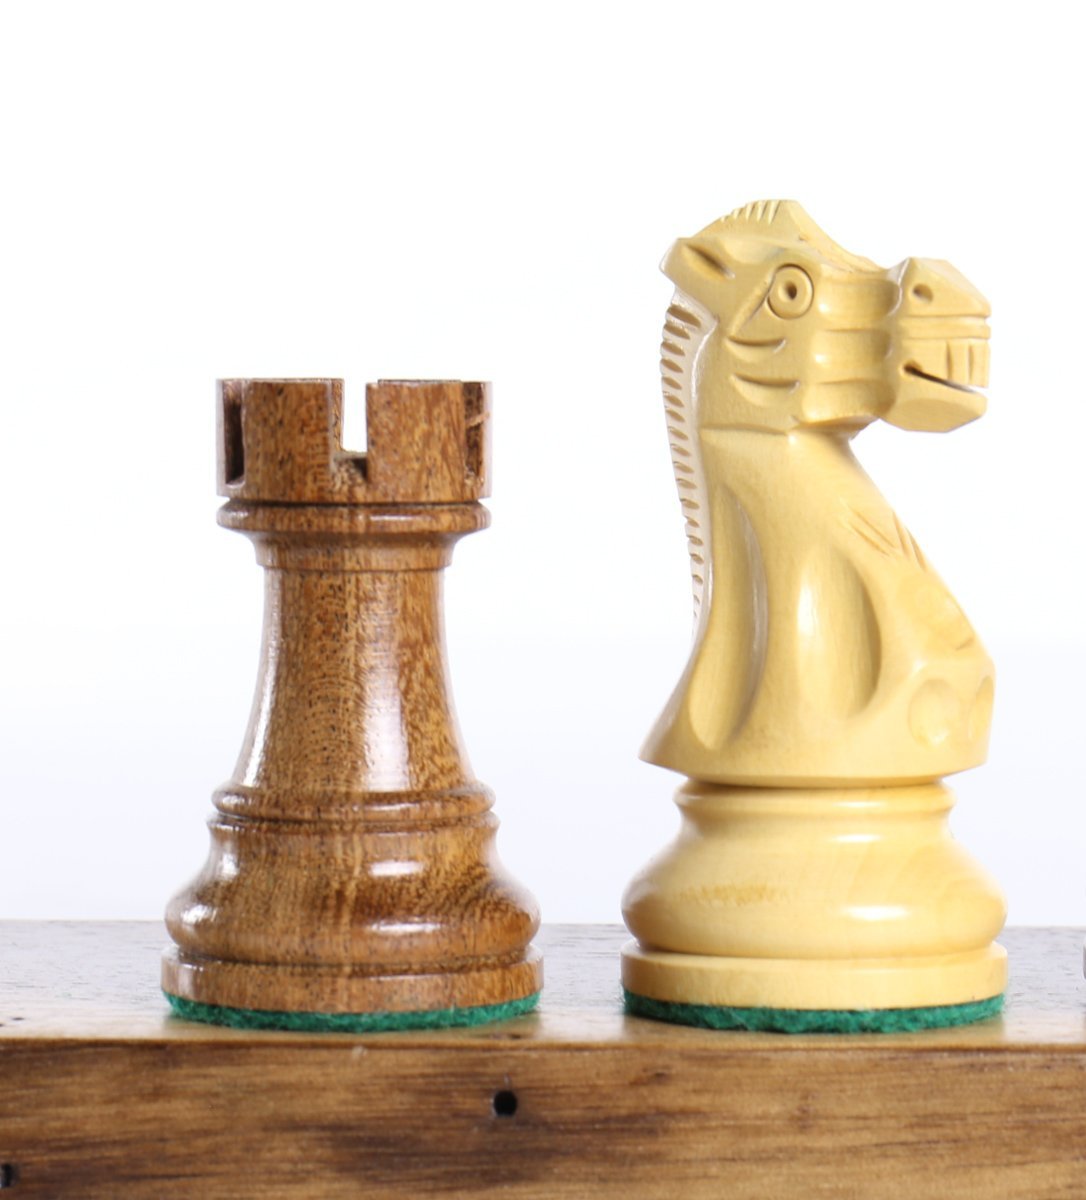 SINGLE REPLACEMENT PIECES: Classic 3.75" Chess Pieces In Acacia Parts